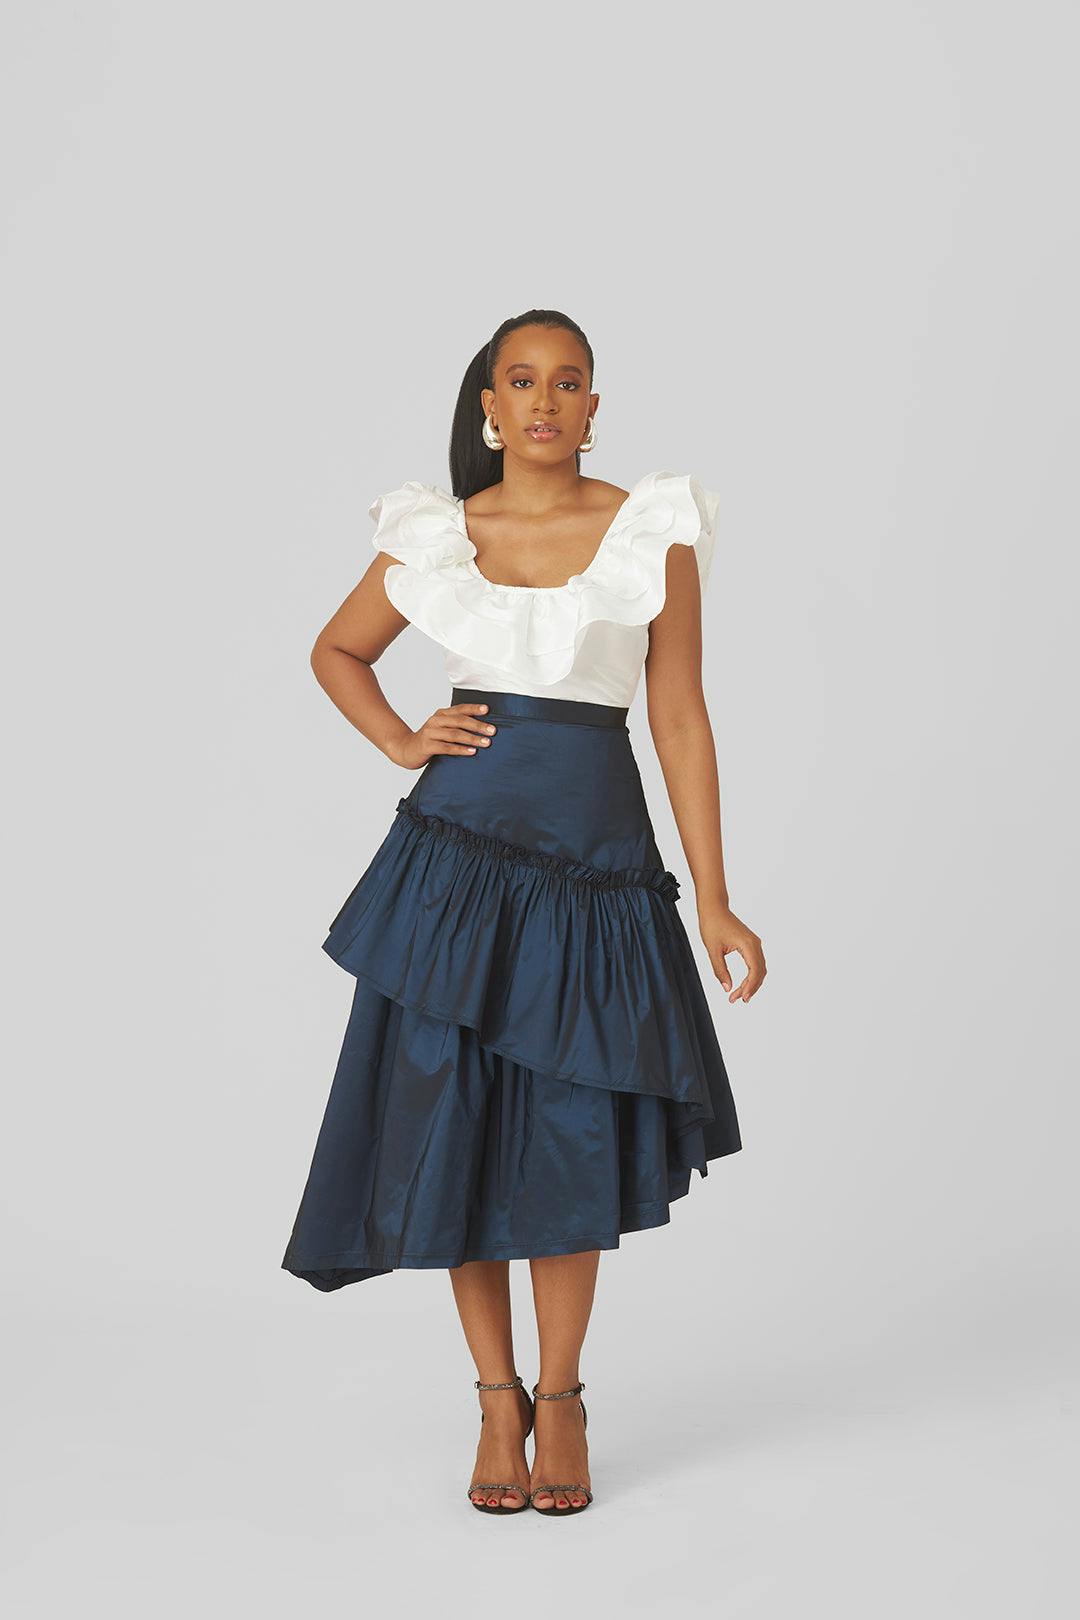 Moremi Skirt, a product by M.O.T the Label